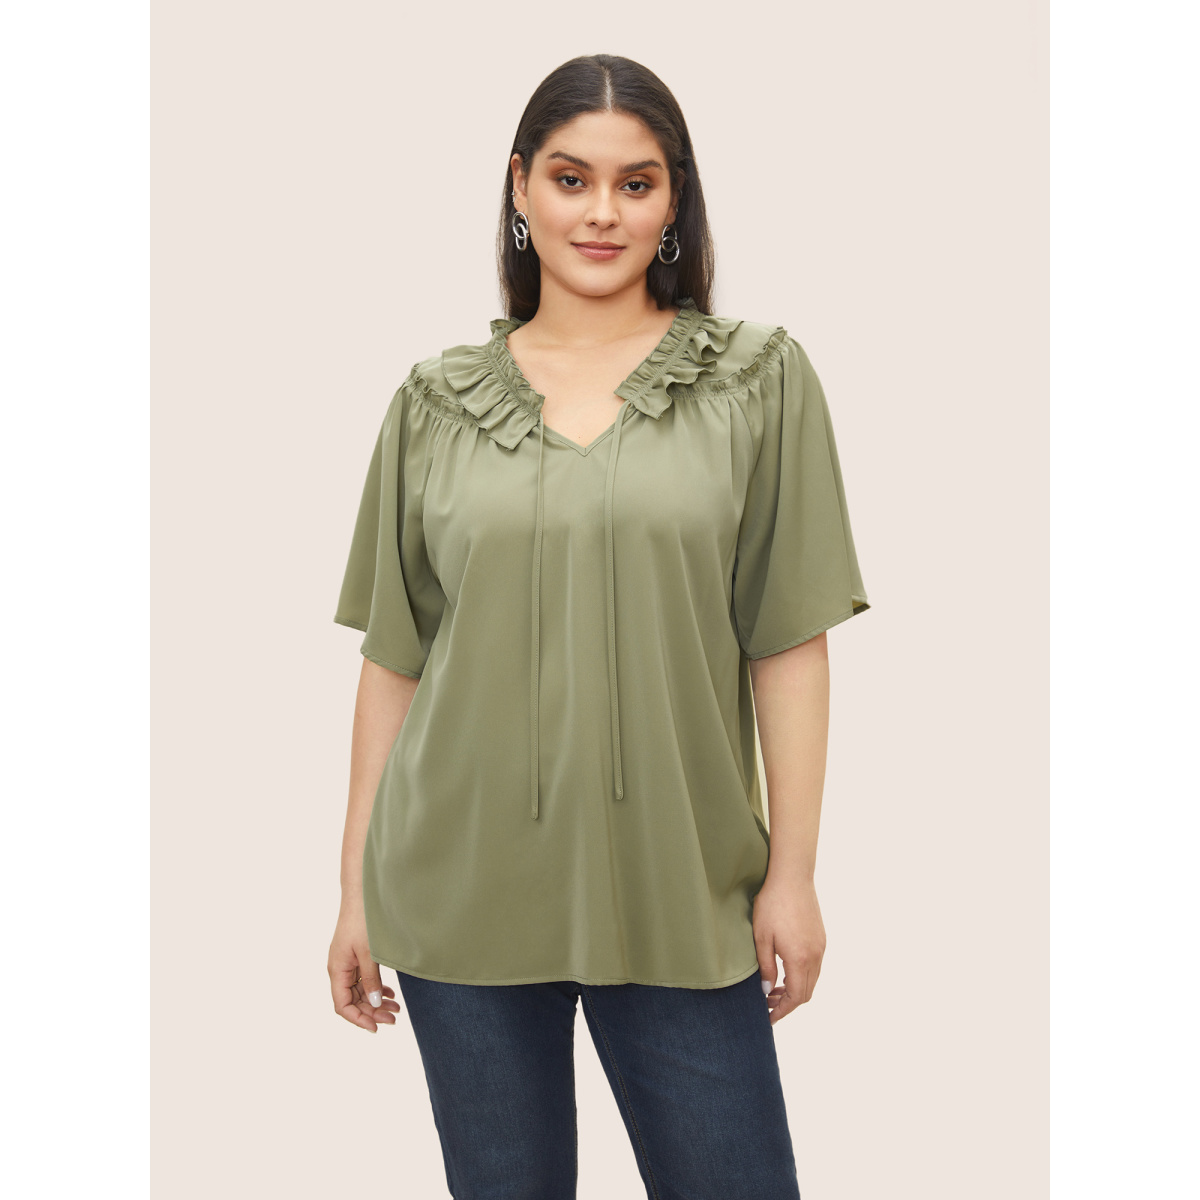 

Plus Size Sage Anti-Wrinkle Plain Frill Trim Gathered Blouse Women At the Office Short sleeve V-neck Work Blouses BloomChic